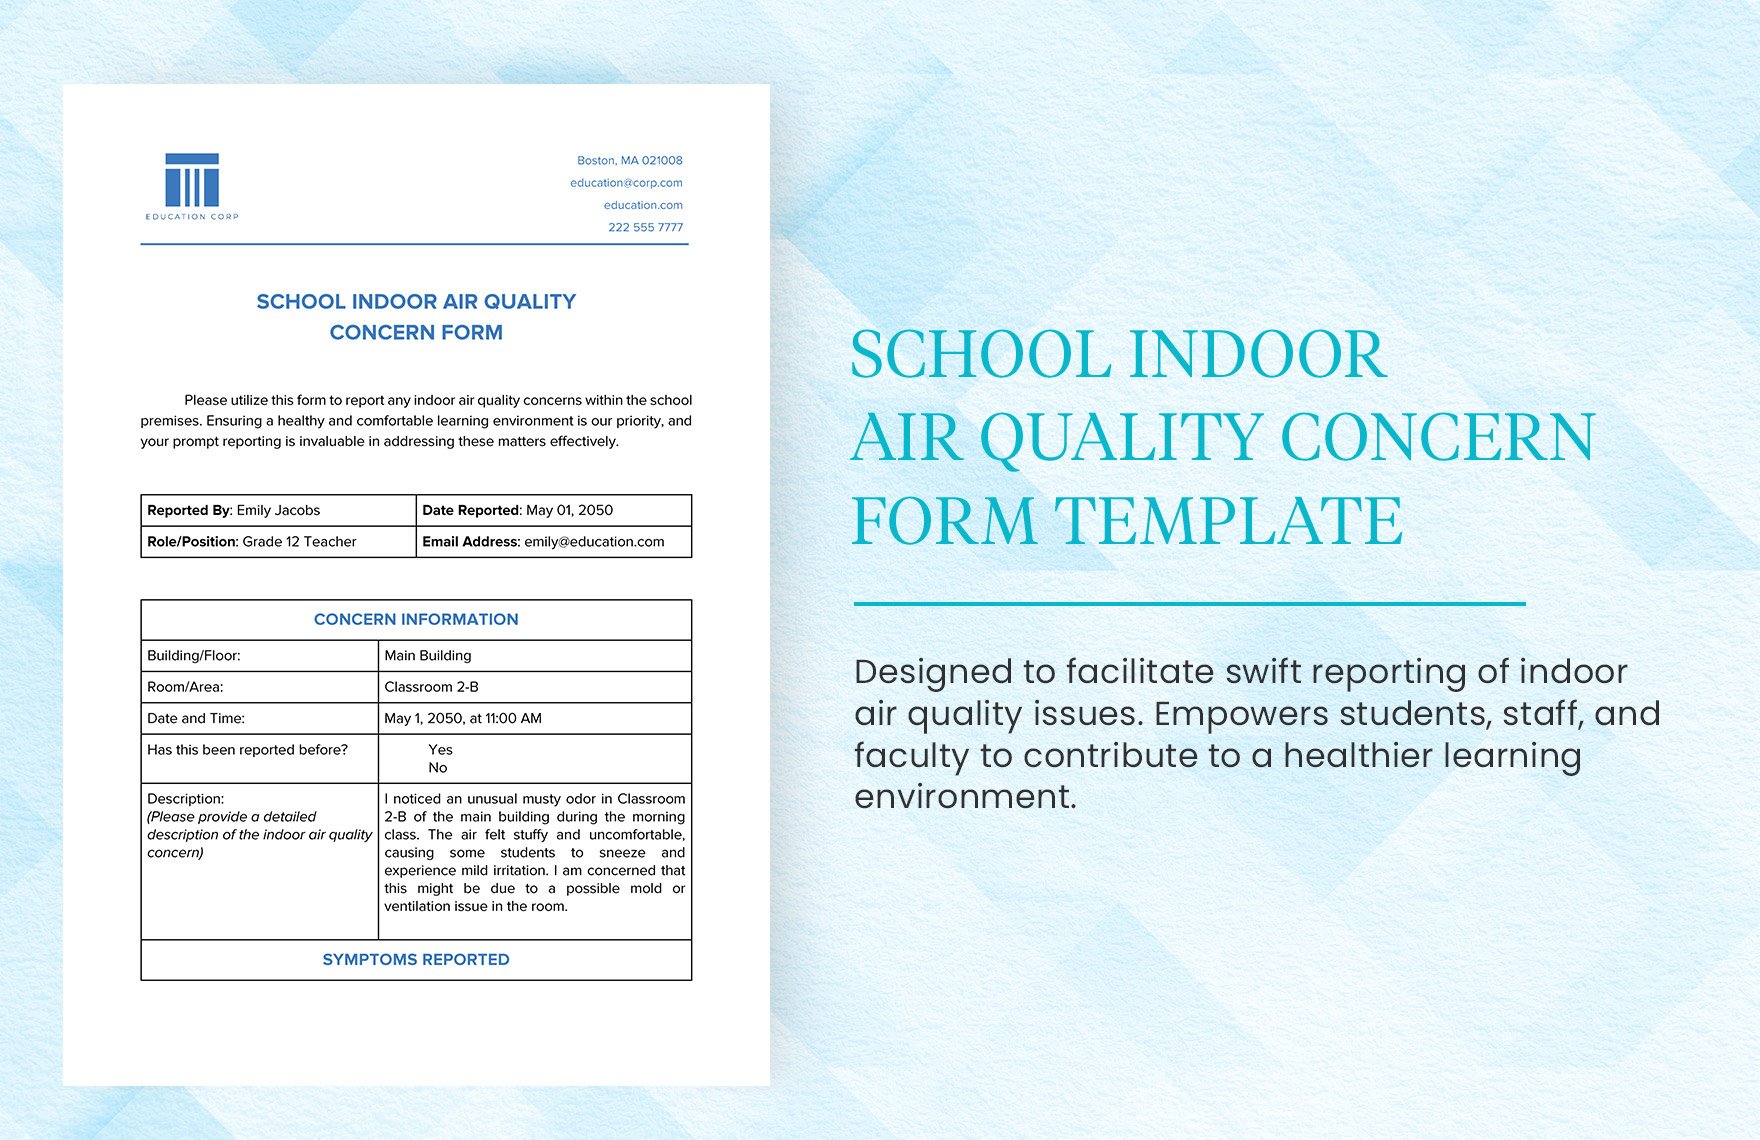 School Indoor Air Quality Concern Form Template